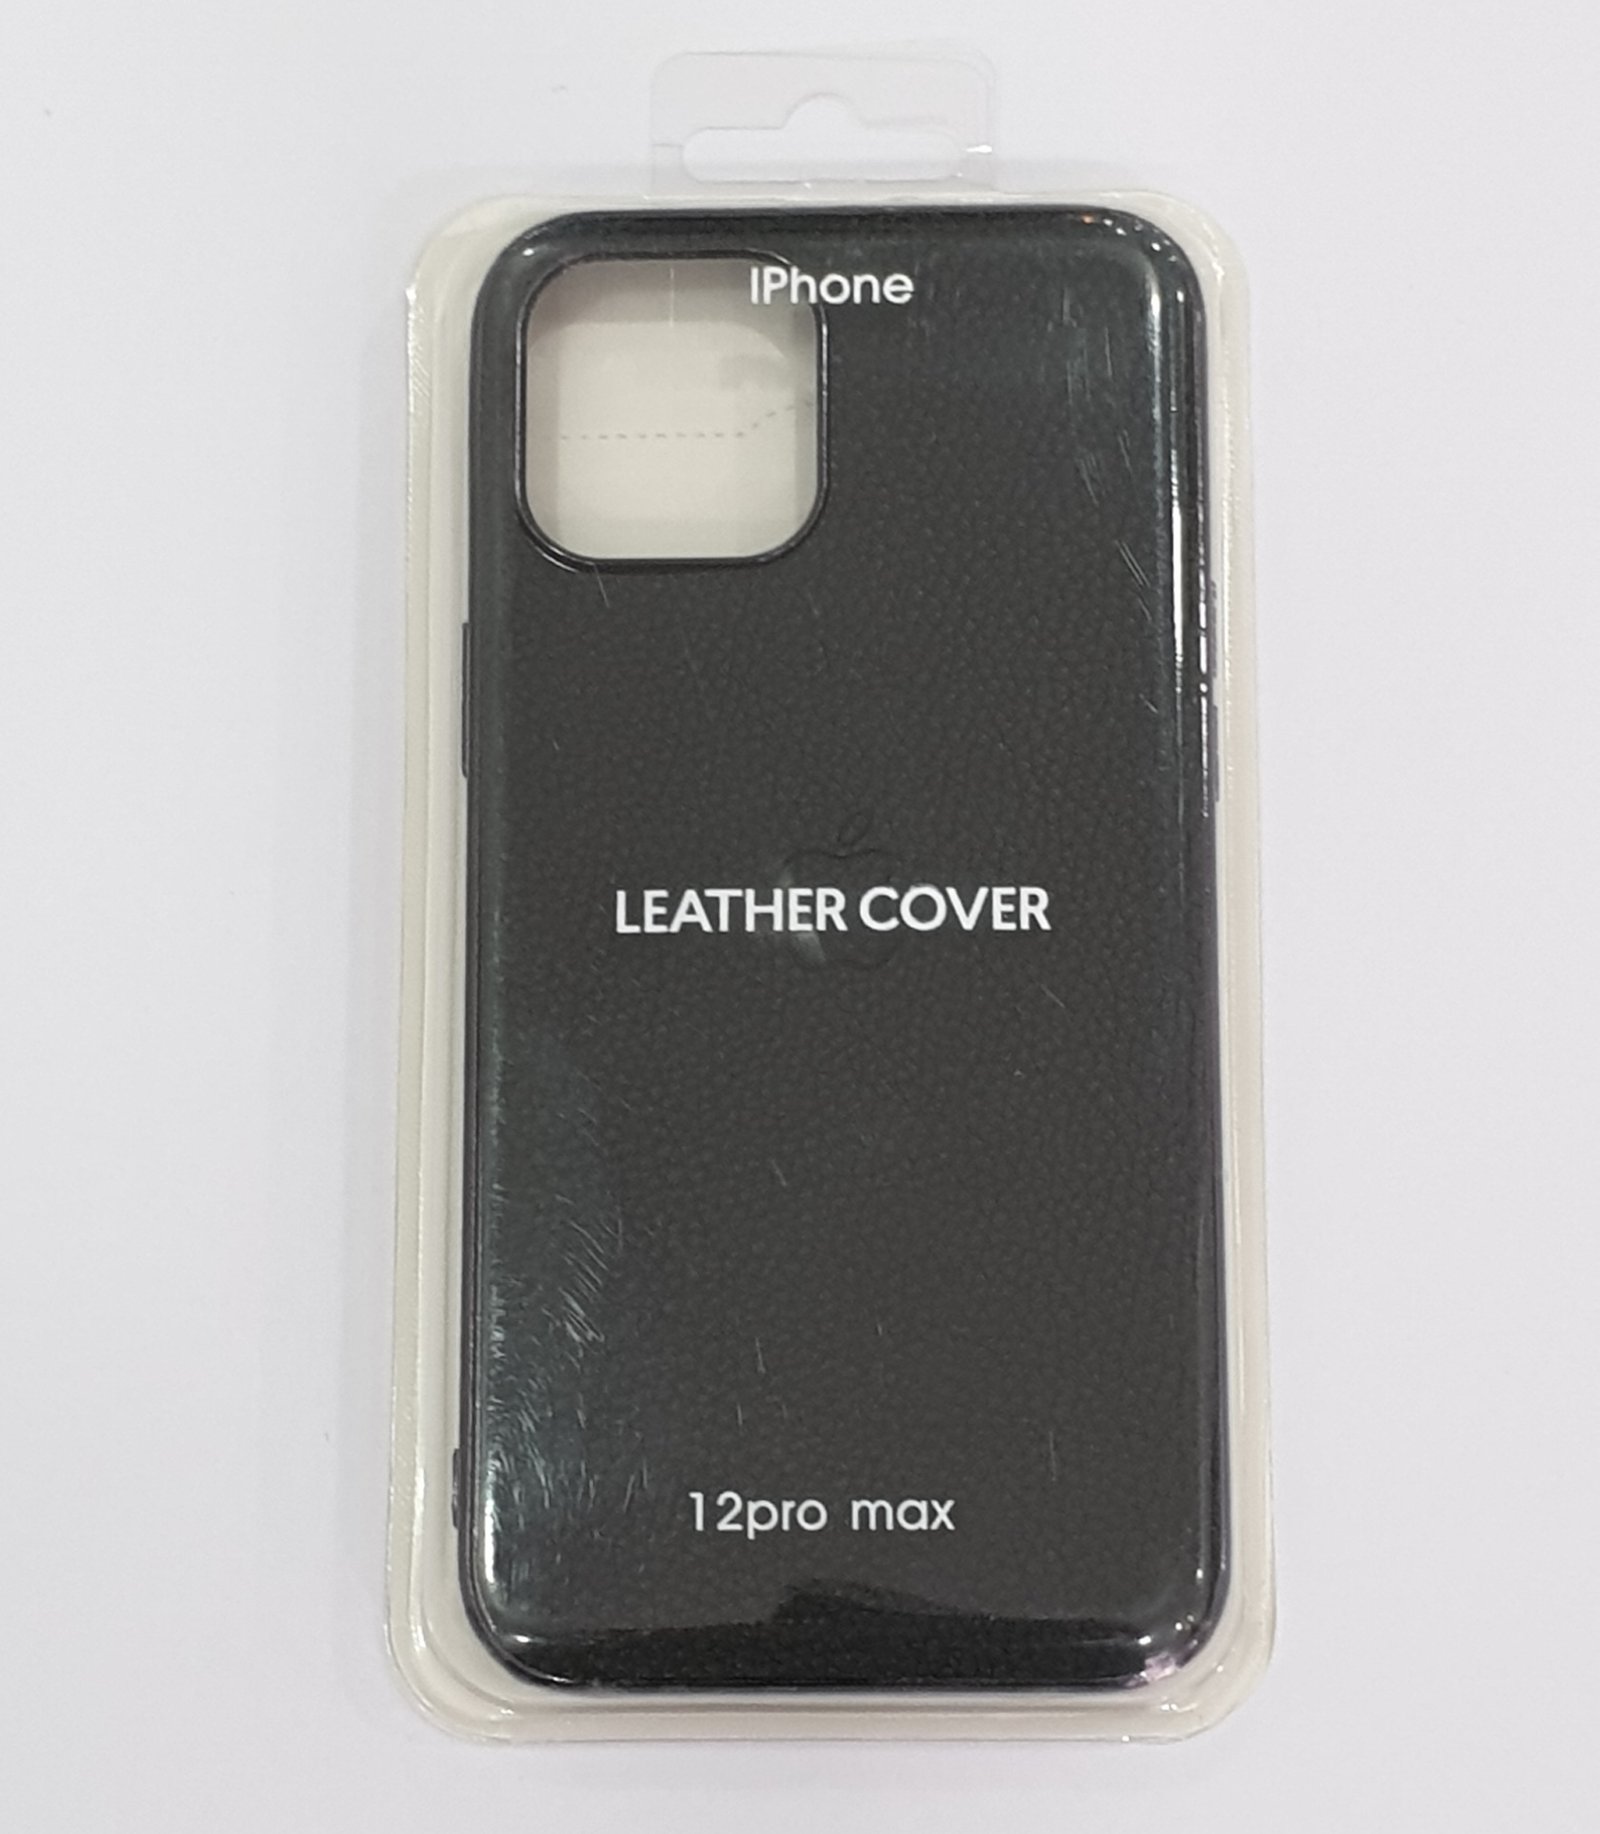 Apple Iphone 12 pro max Leather finish back cover.